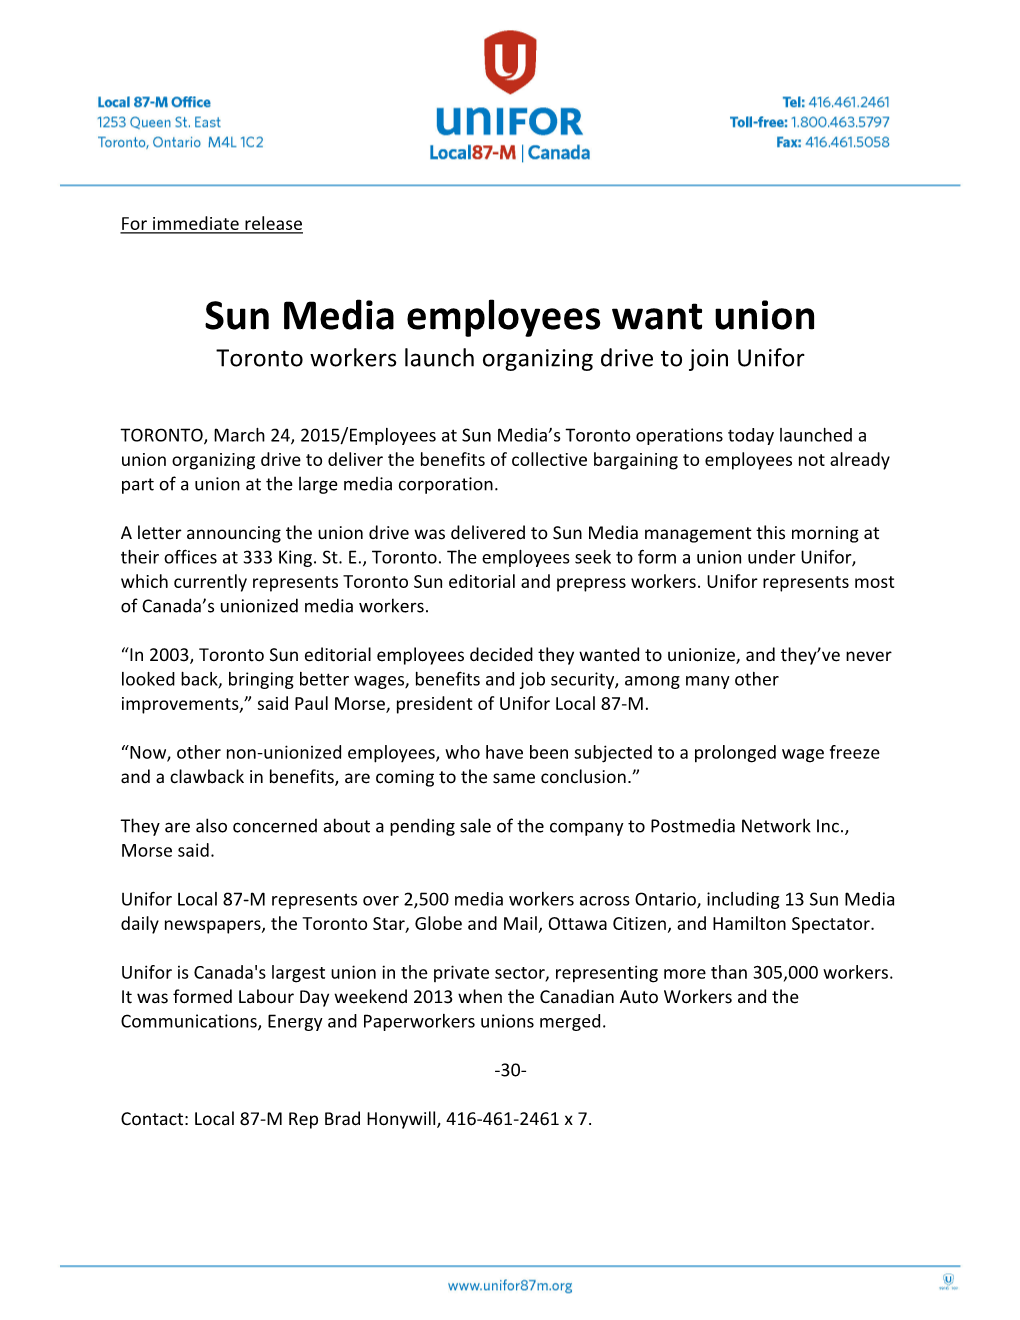 Sun Media Employees Want Union Toronto Workers Launch Organizing Drive to Join Unifor